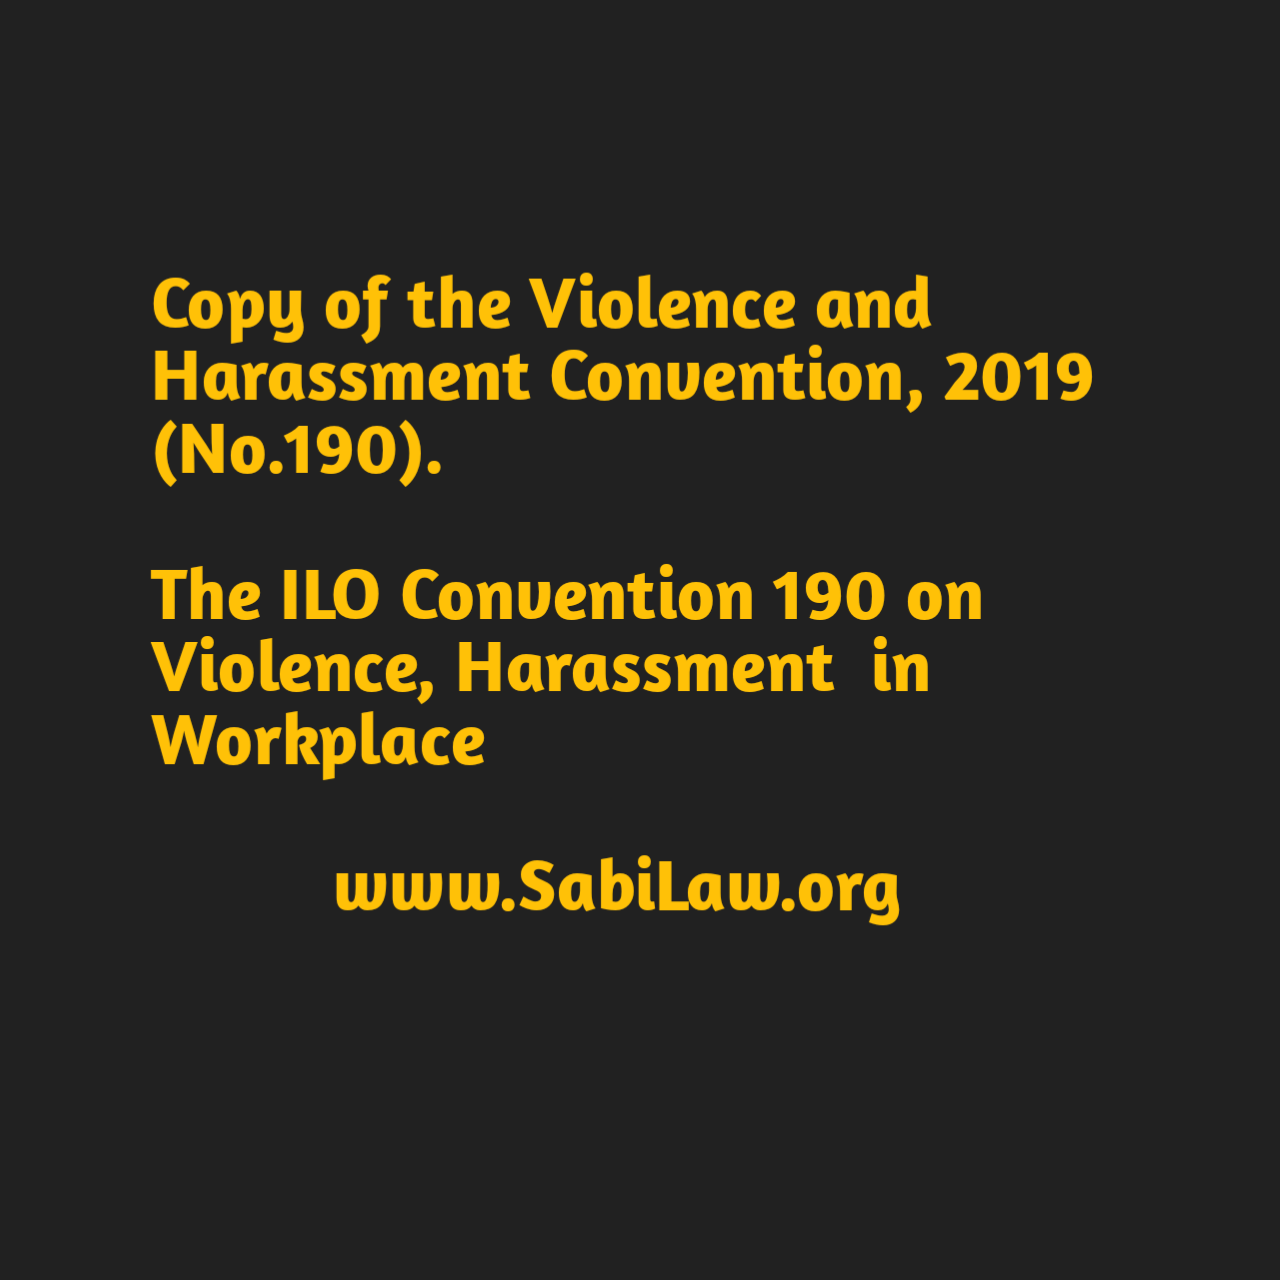 Click to download a copy of the ILO Convention 190 on Violence, Harassment in Workplace